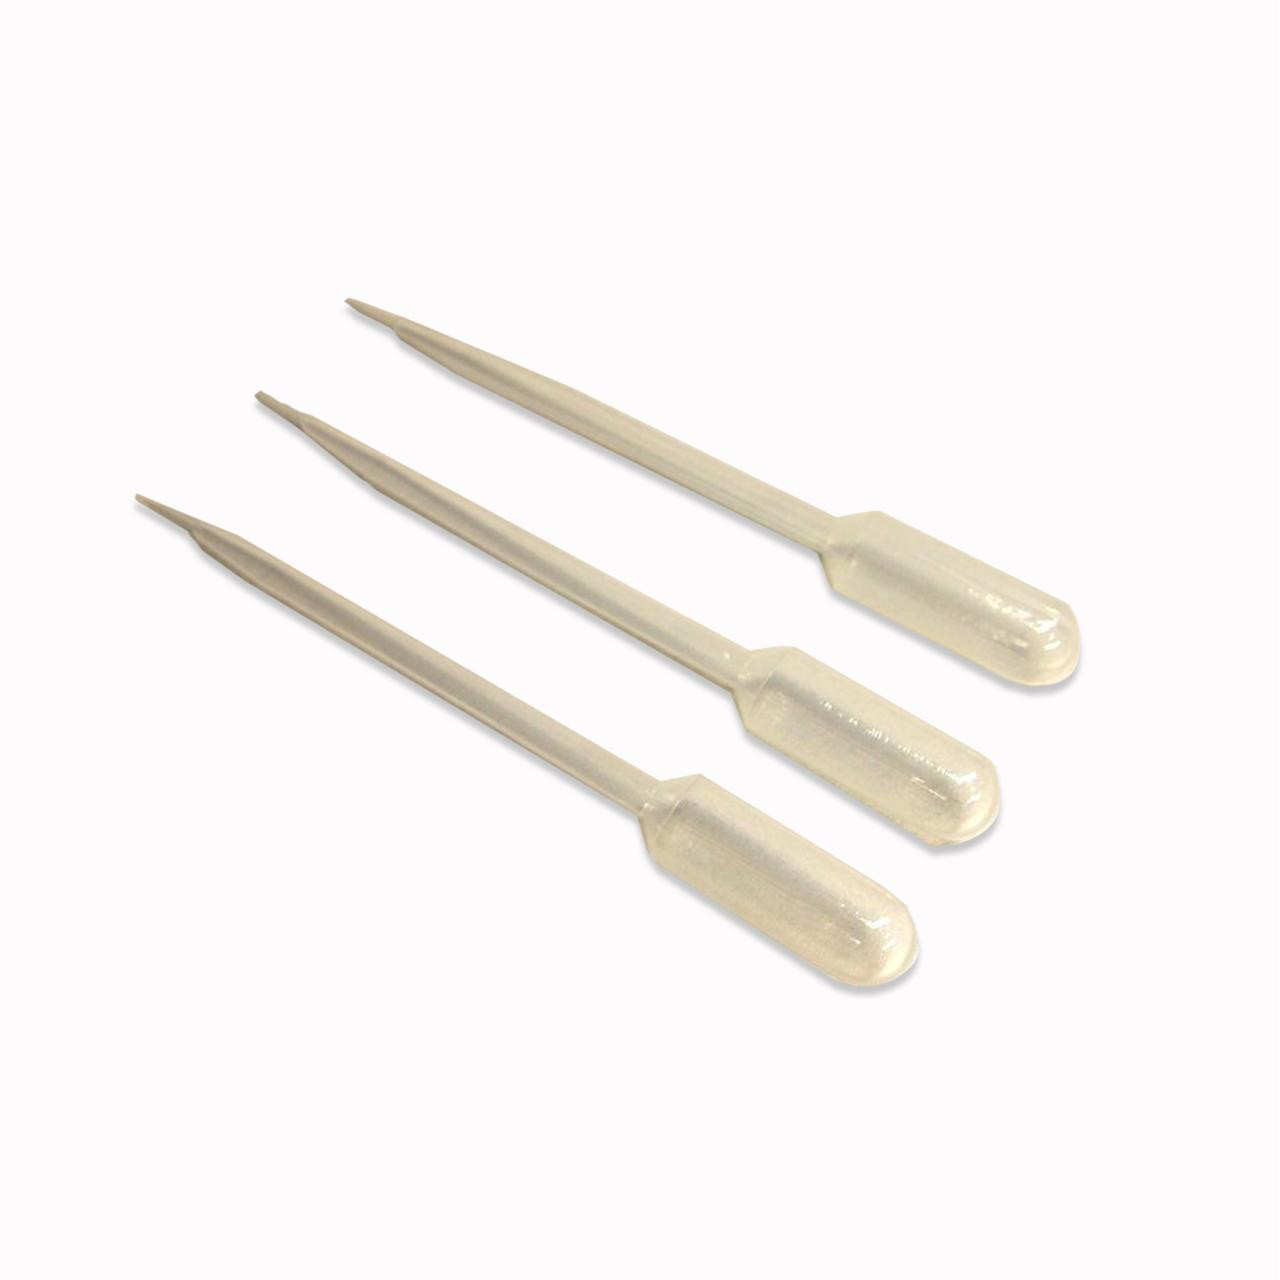 1 oz Bellows Type Glue Applicator Set of 2, apply small amounts of glue for  precise application and easy control of glue flow